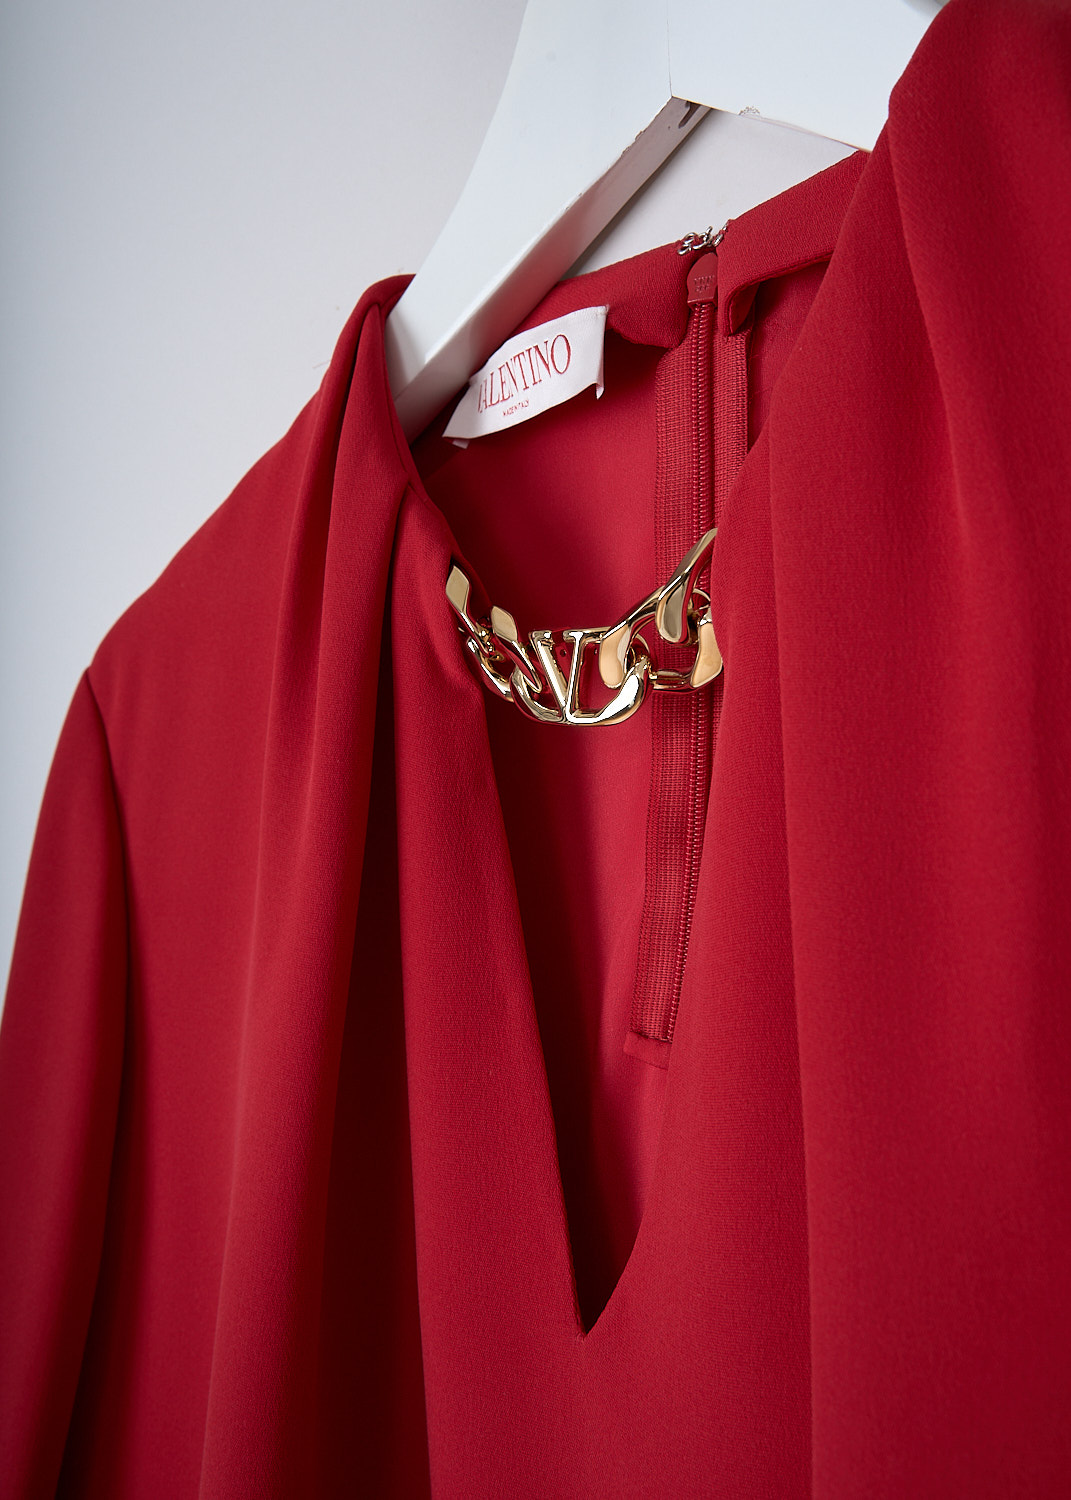 VALENTINO, RED SILK TOP WITH GOLD-TONE CHAIN DETAIL, 1B3AE7551MM_157, Red, Detail, This red silk top has a V-neckline with a gold-tone V-logo chain. The top has long balloon sleeves with pleated cuffs with a single button. In the back, the dress has a concealed centre zip. The dress has a straight hemline. 
